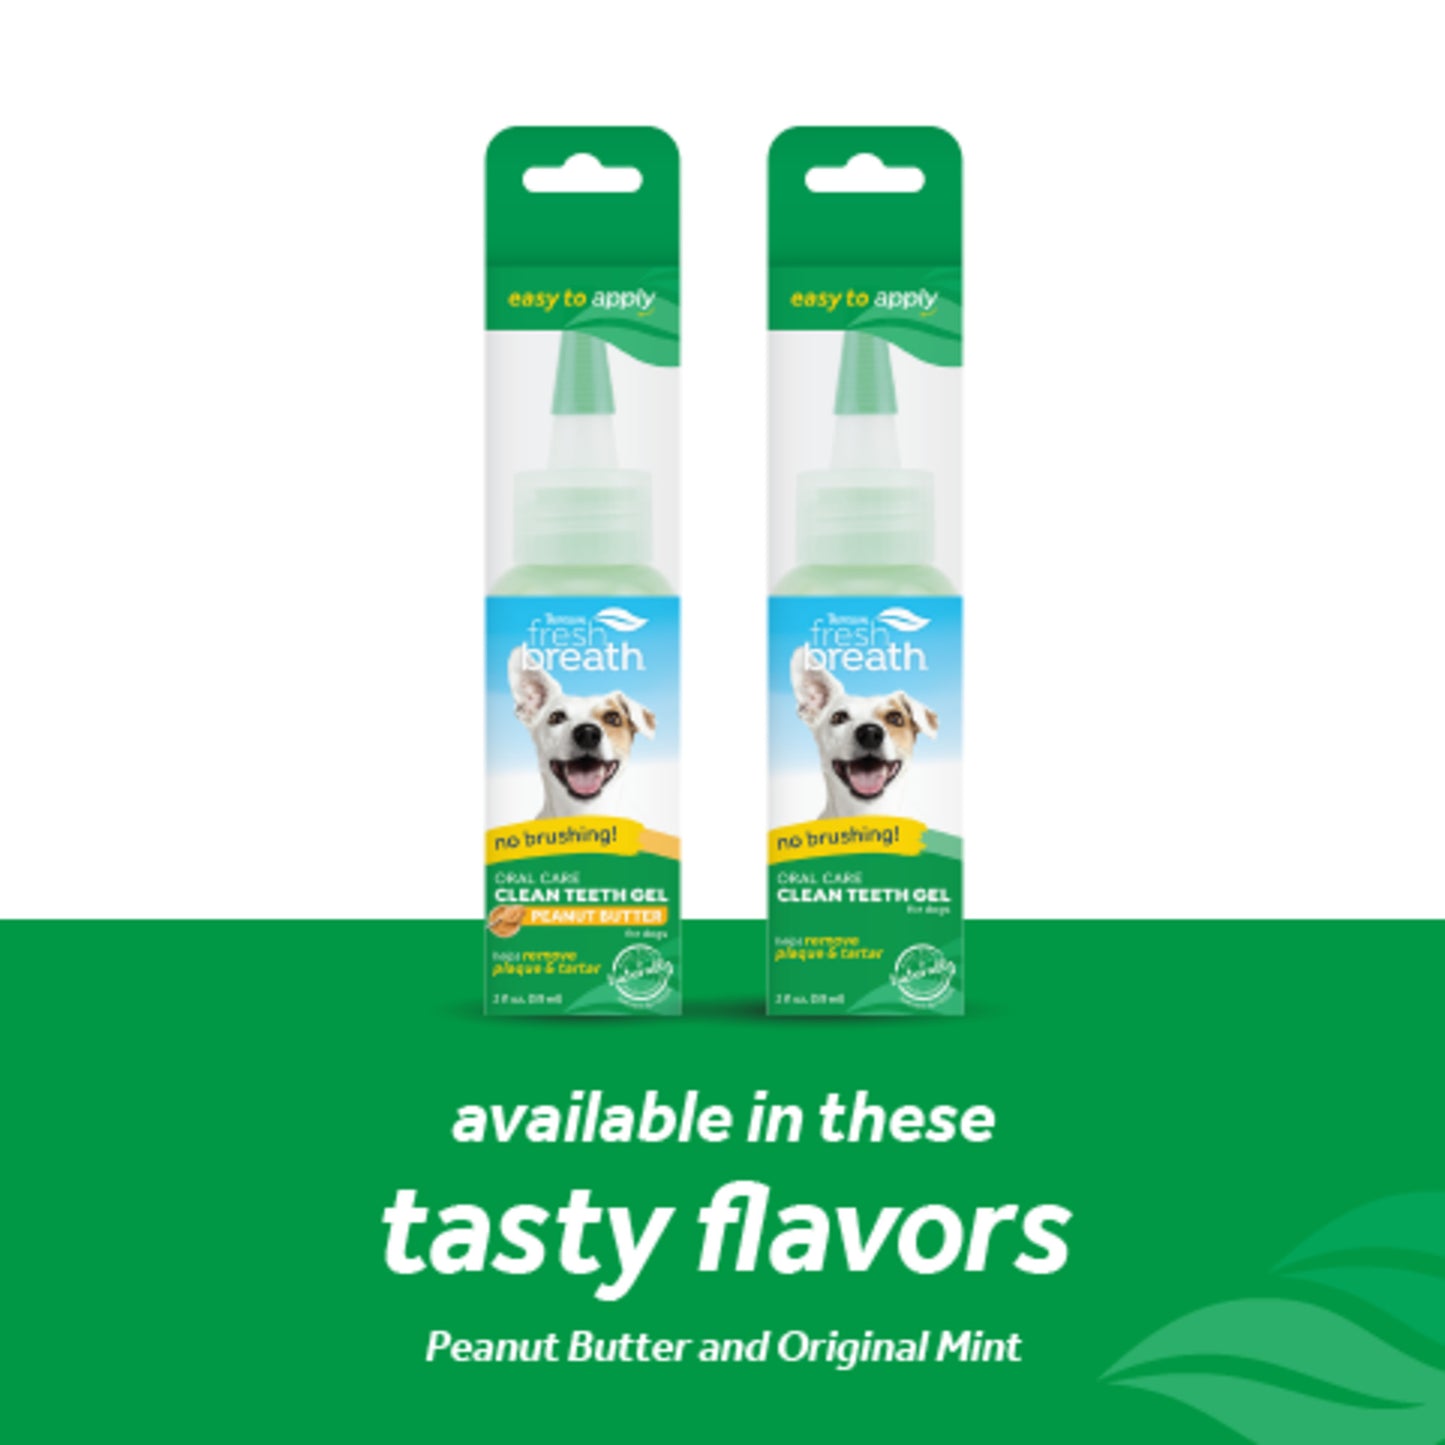 TROPICLEAN FRESH BREATH ORAL CARE GEL FOR DOGS – PEANUT BUTTER FLAVOR